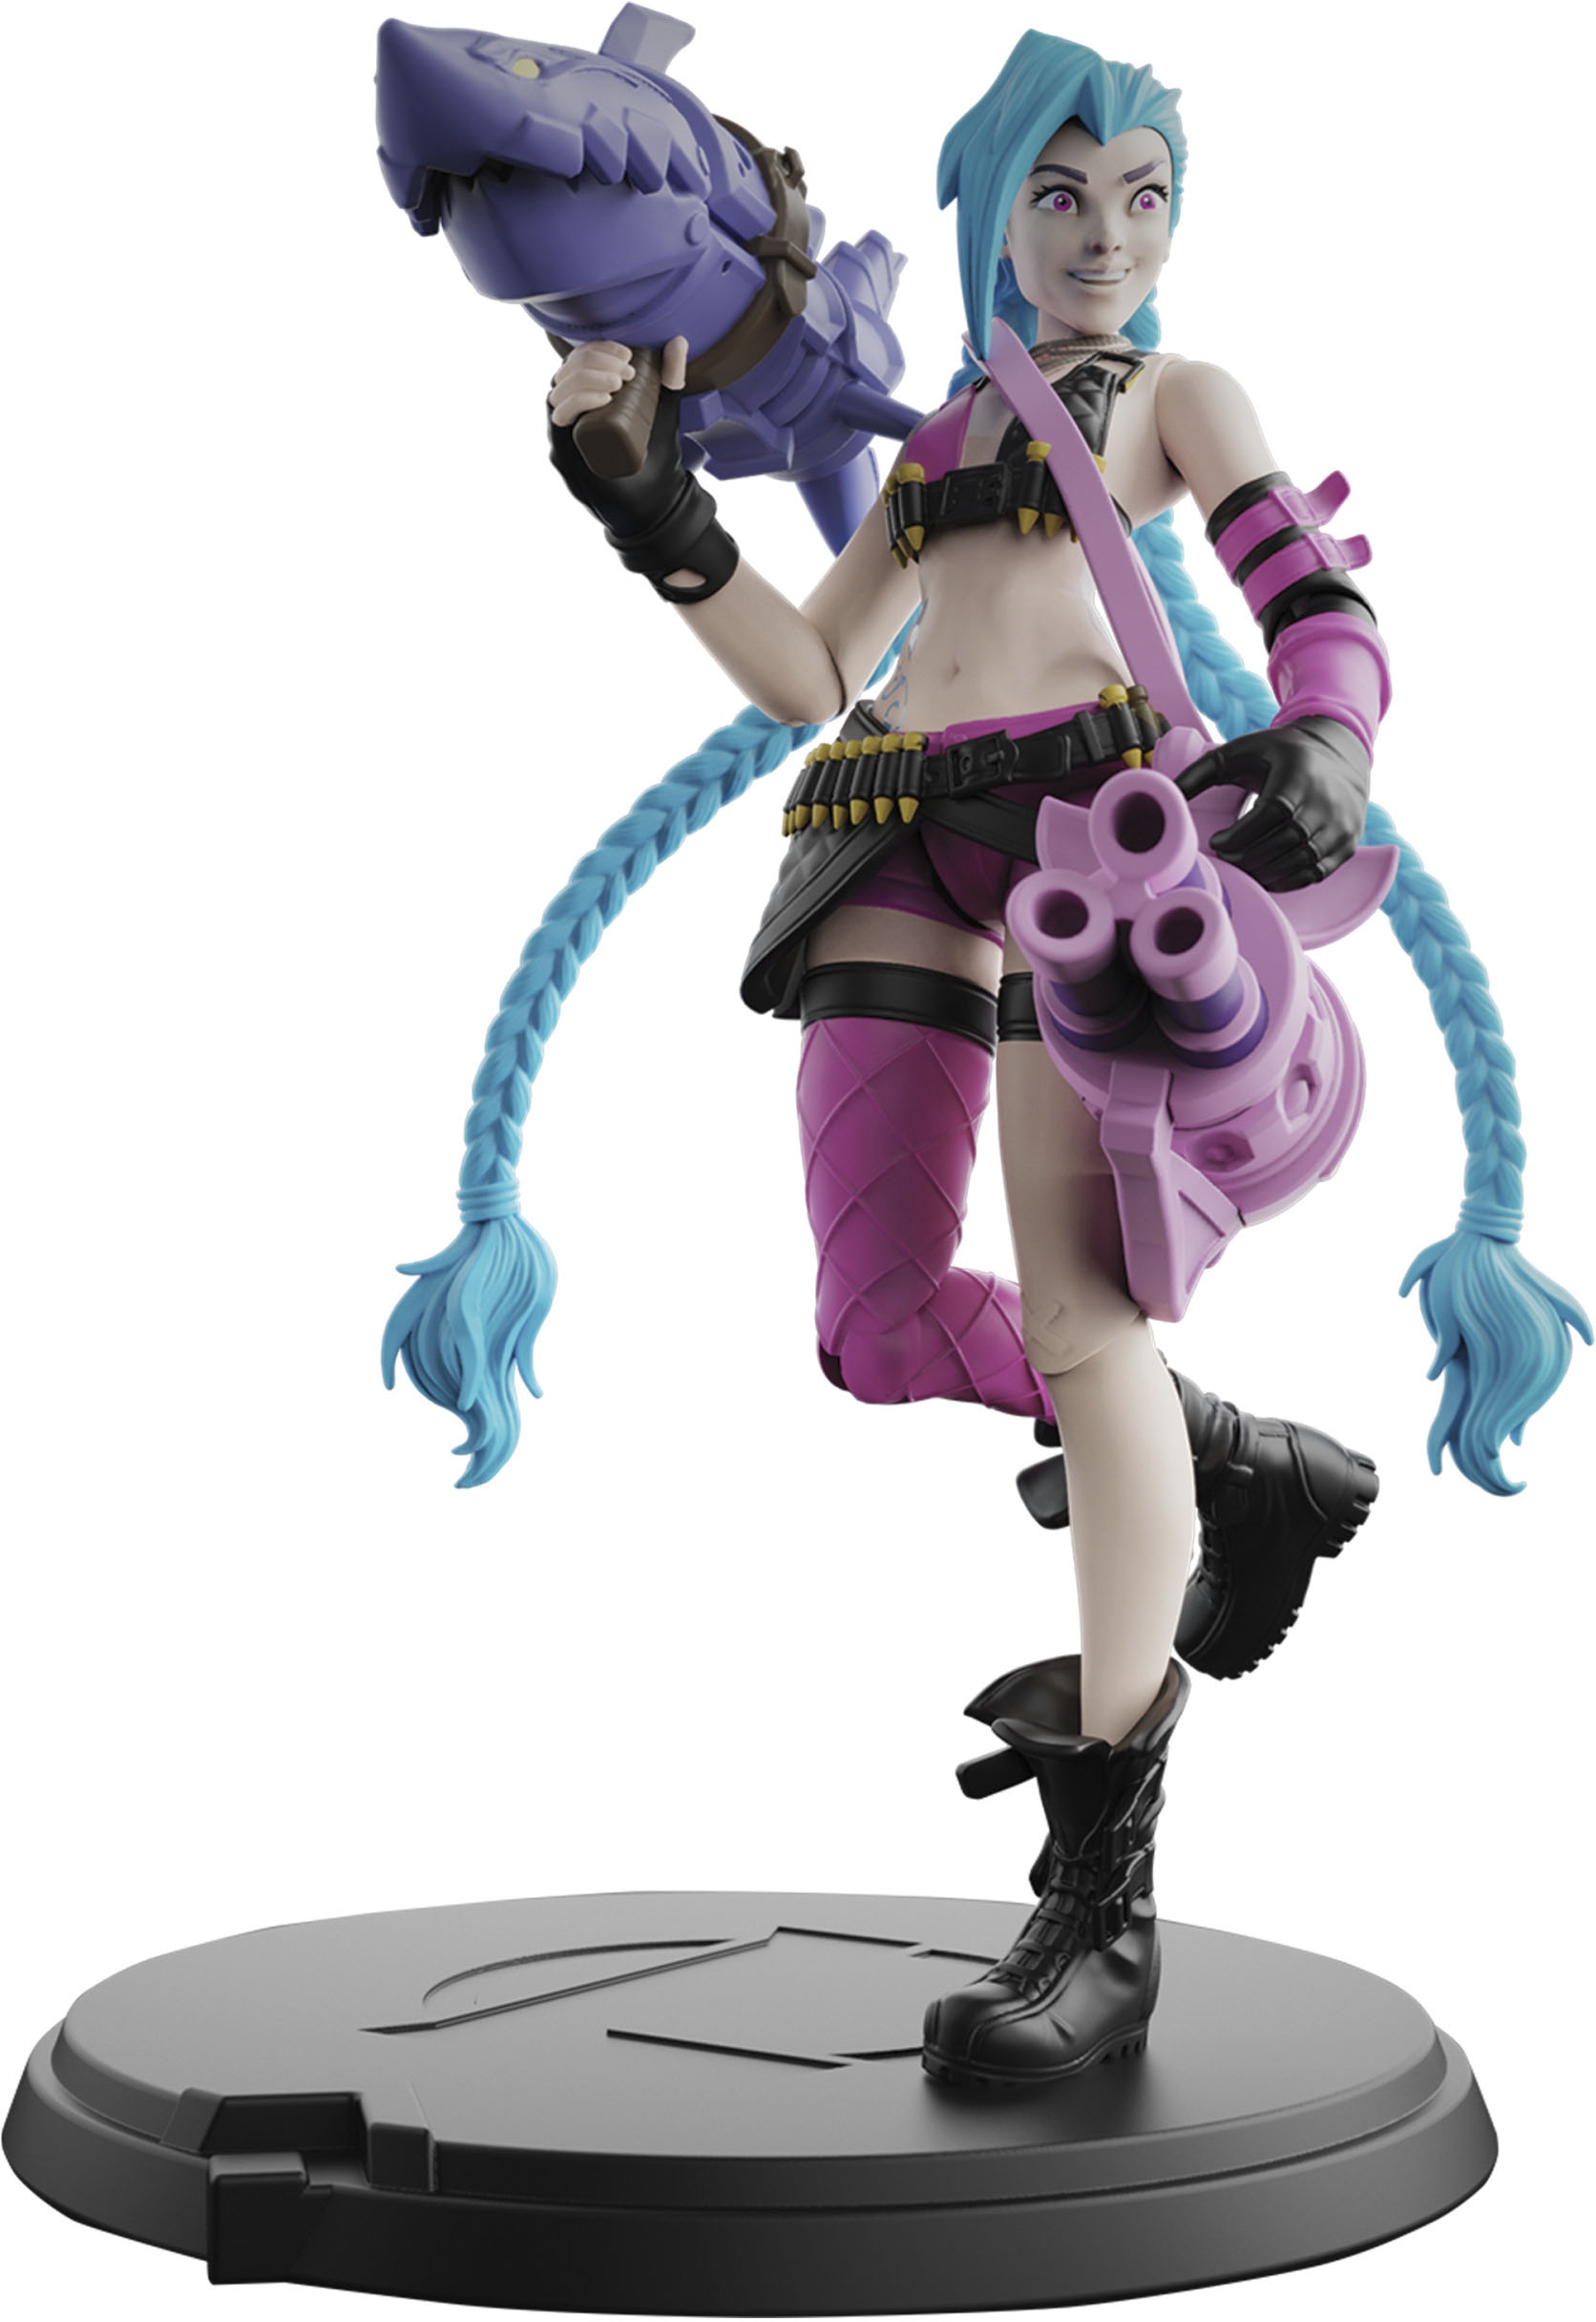 Official 4-Inch Jinx Collectible Figure with Premium Details and 2  Accessories, The Champion Collection, Collector Grade, Ages 12 and Up